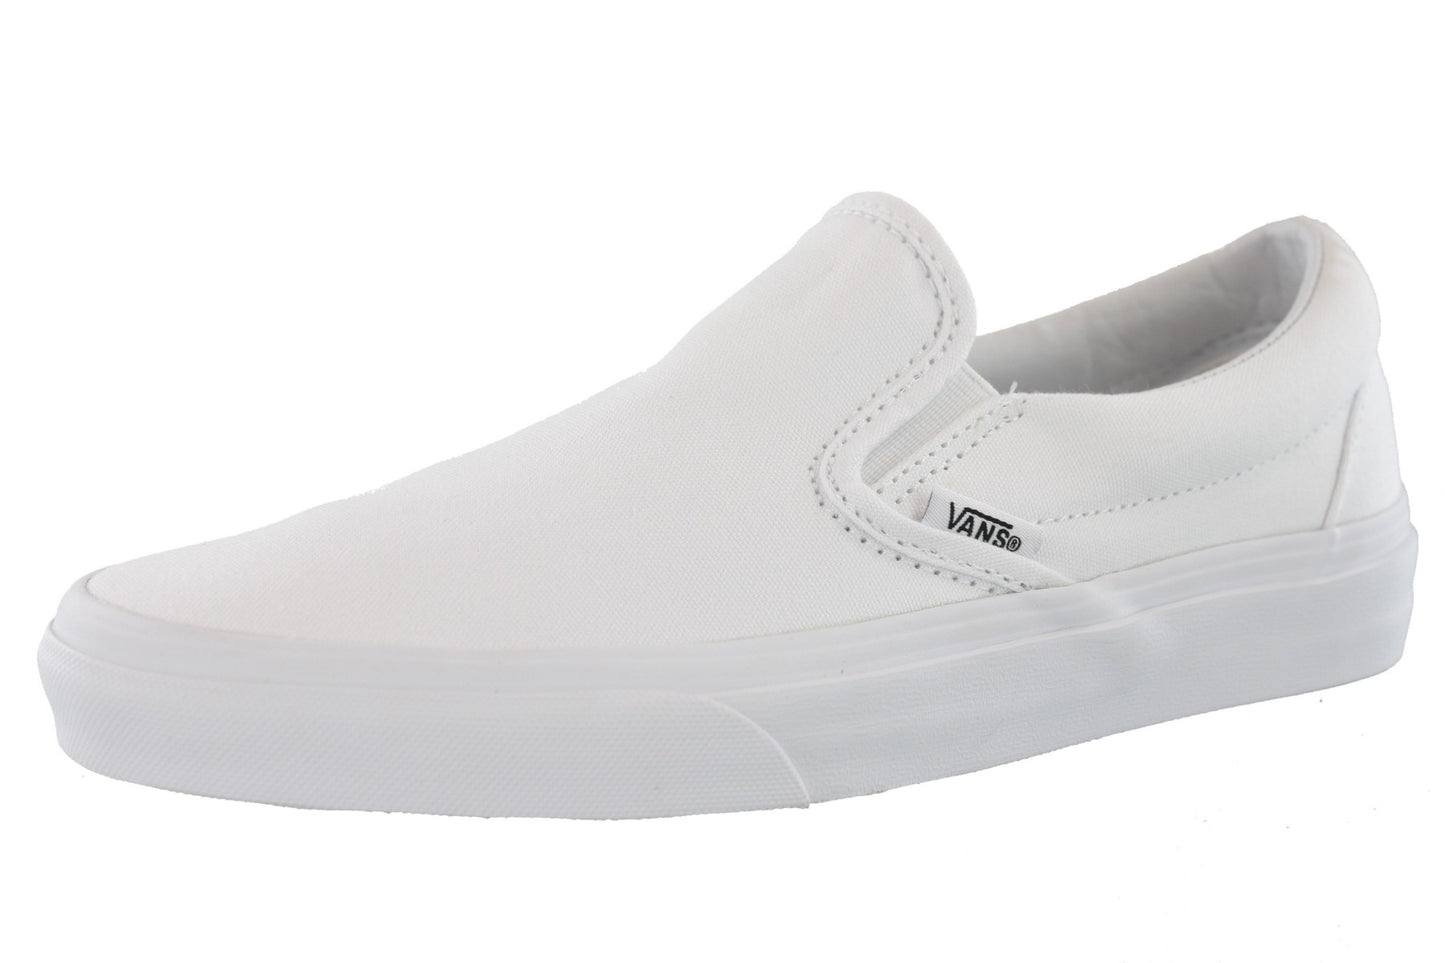 Shop for Stylish and Comfortable Vans Sneaker Online | Shoecity ...